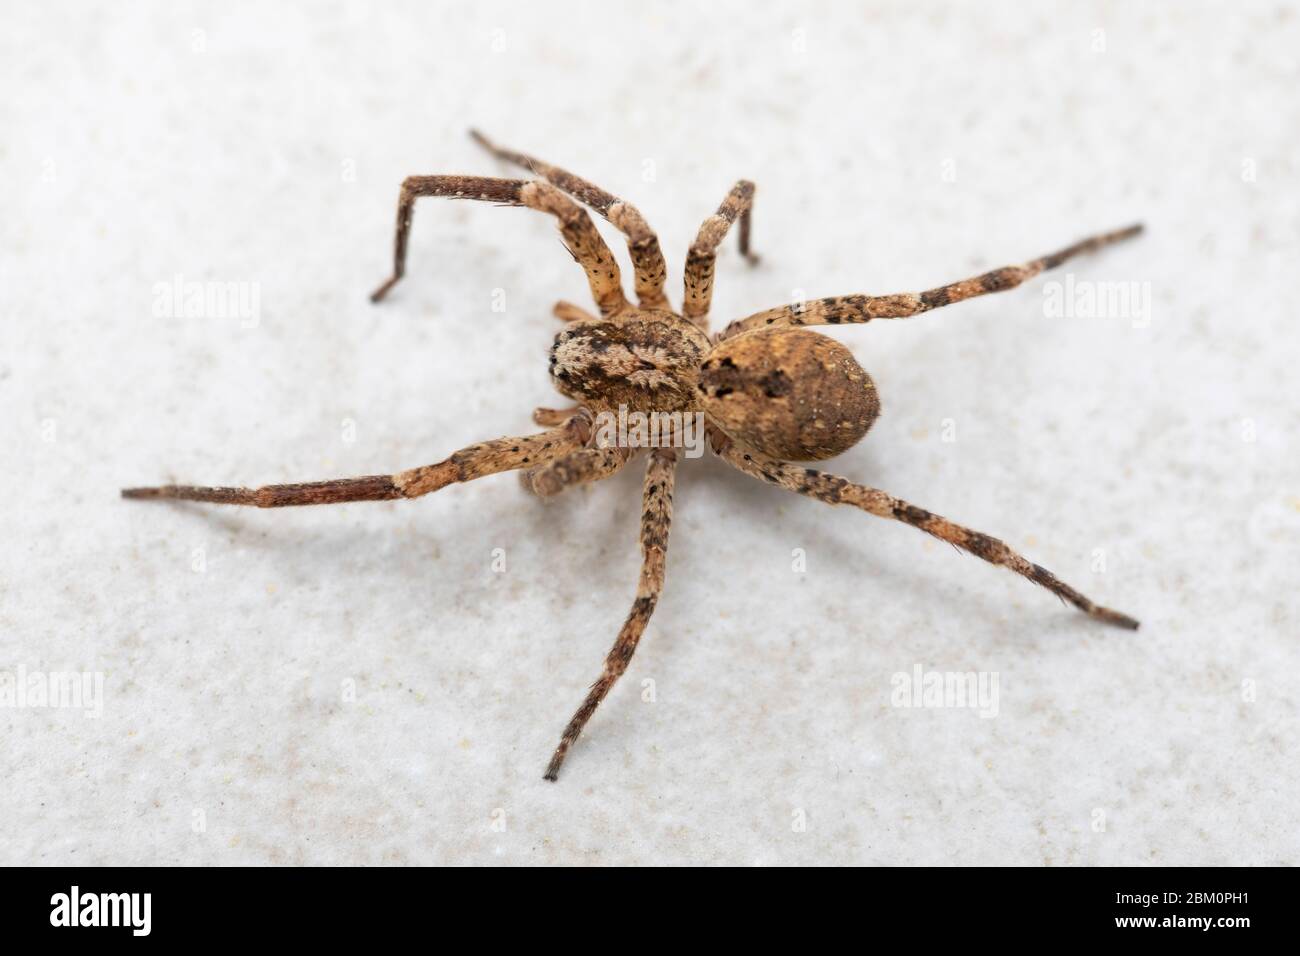 A big brown spider on a white stone background Stock Photo